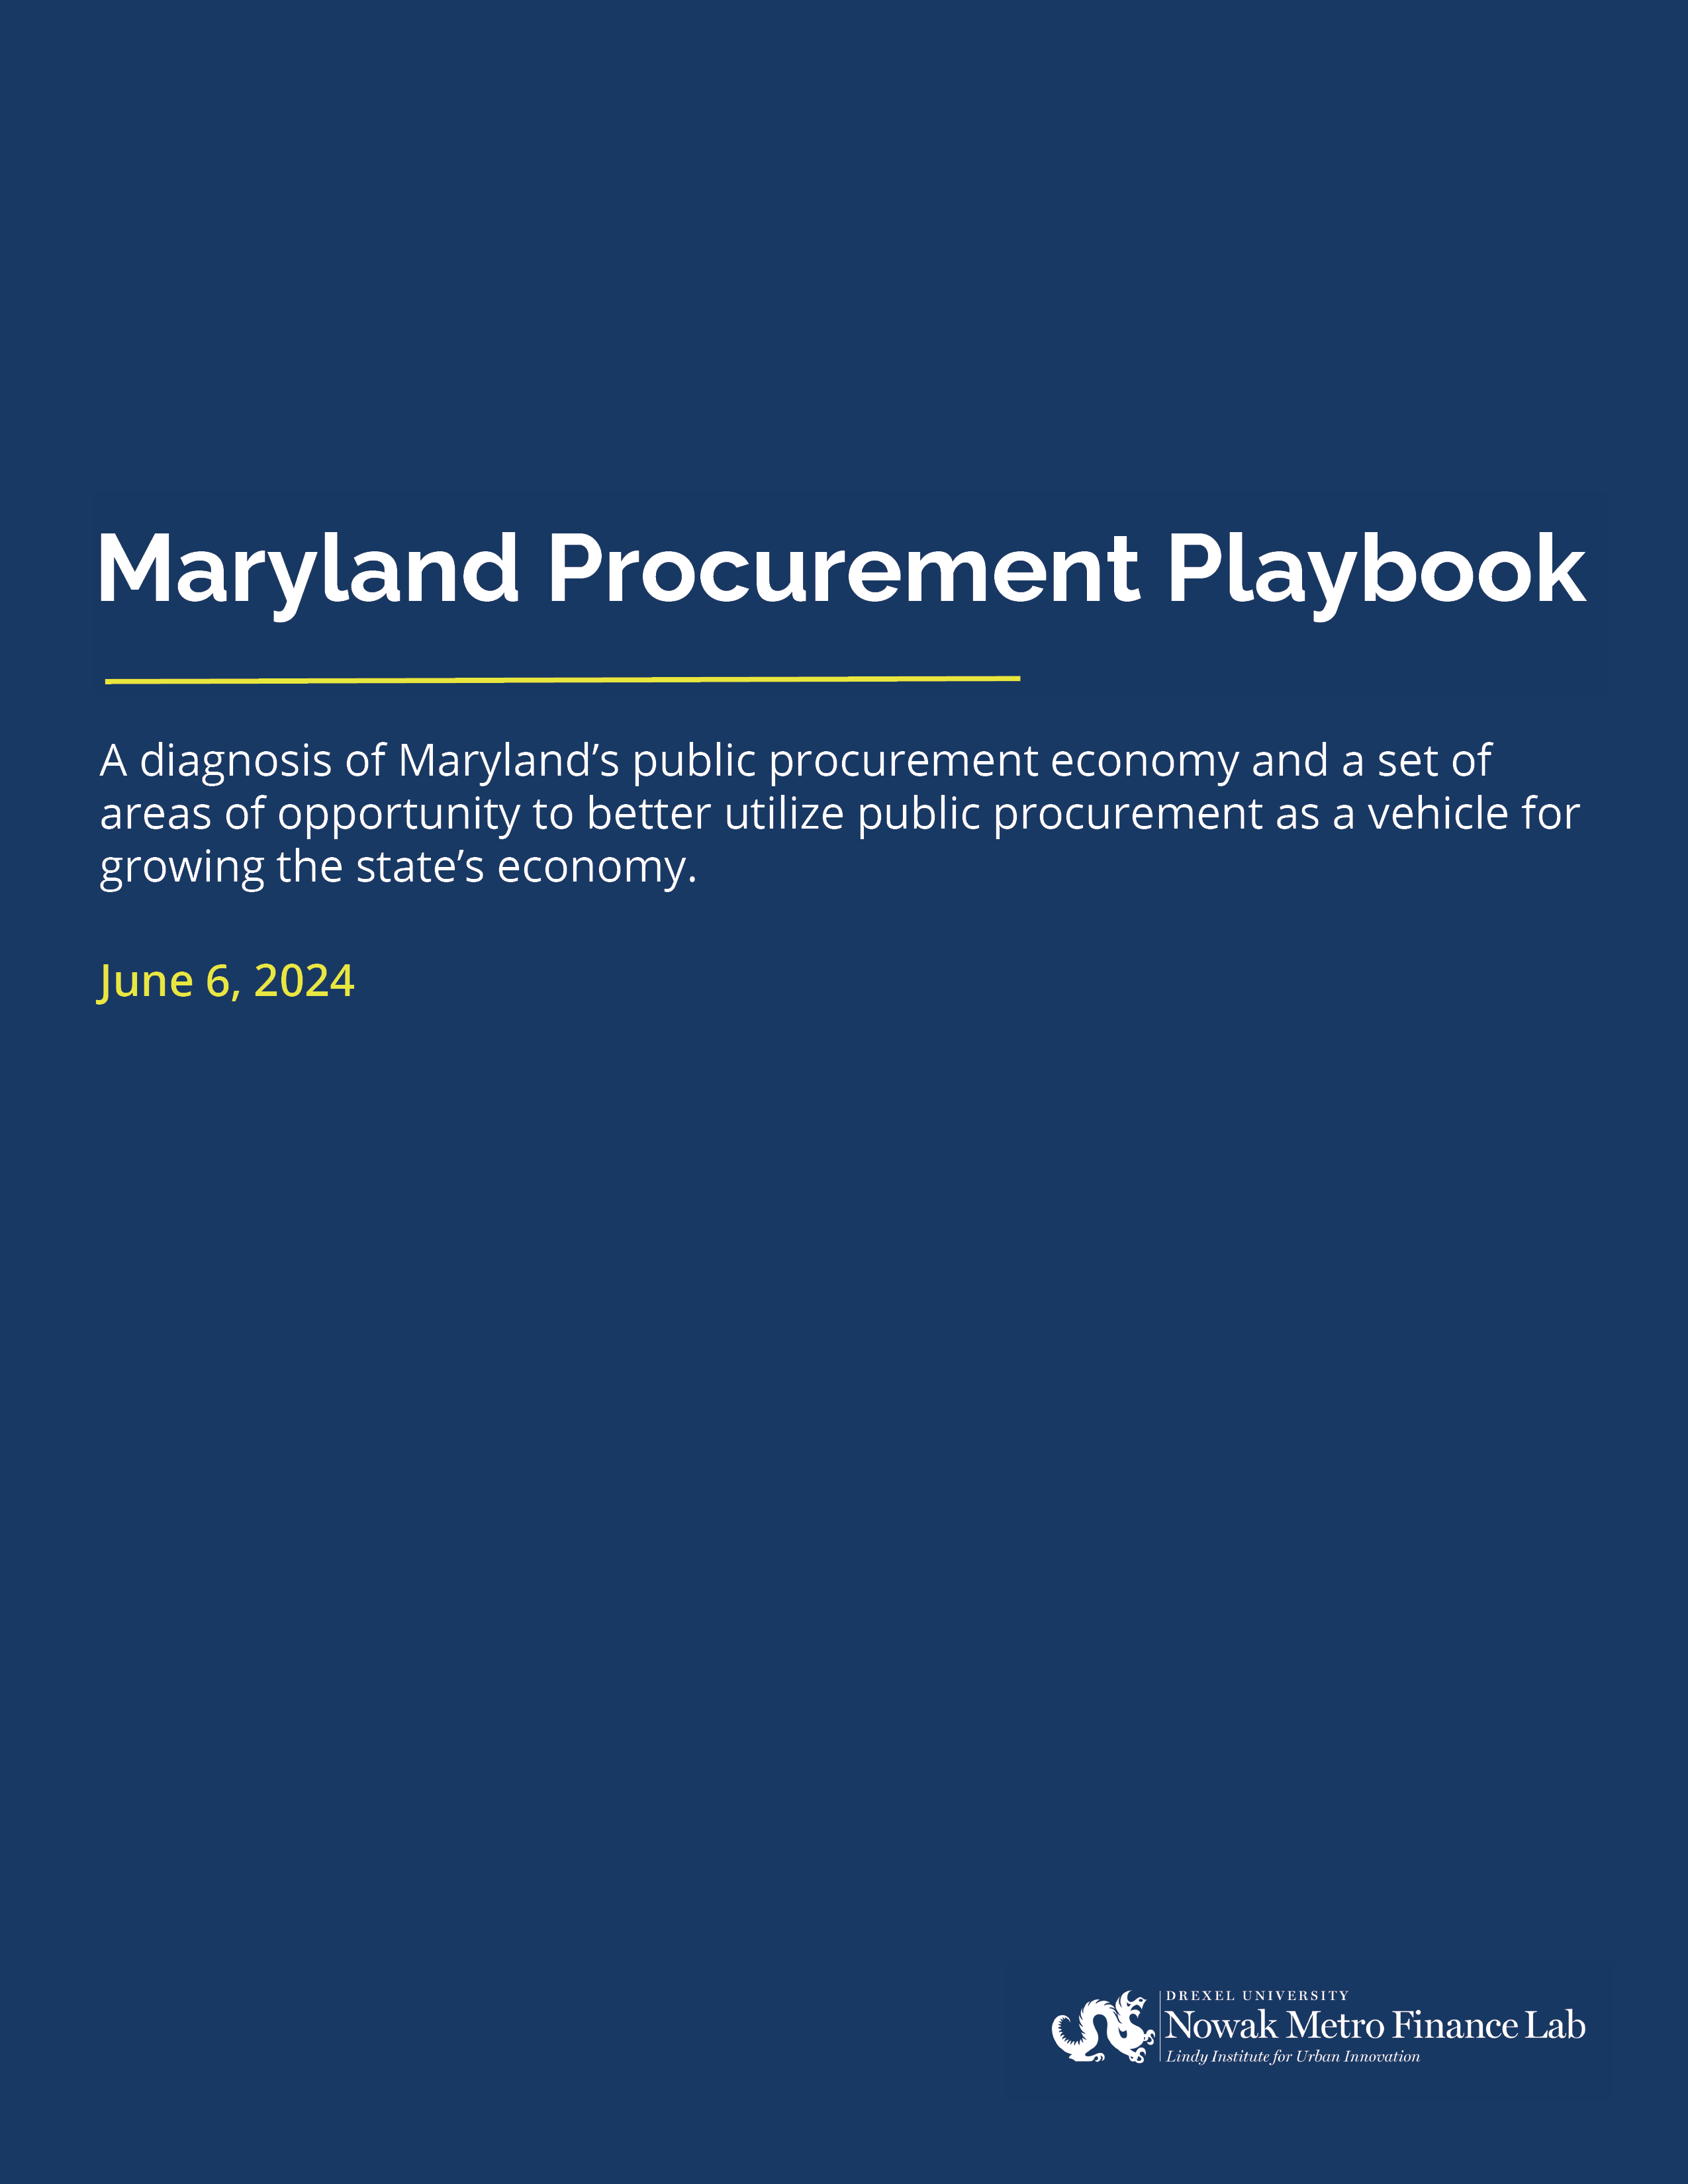 Cover image of MD Procurement Playbook